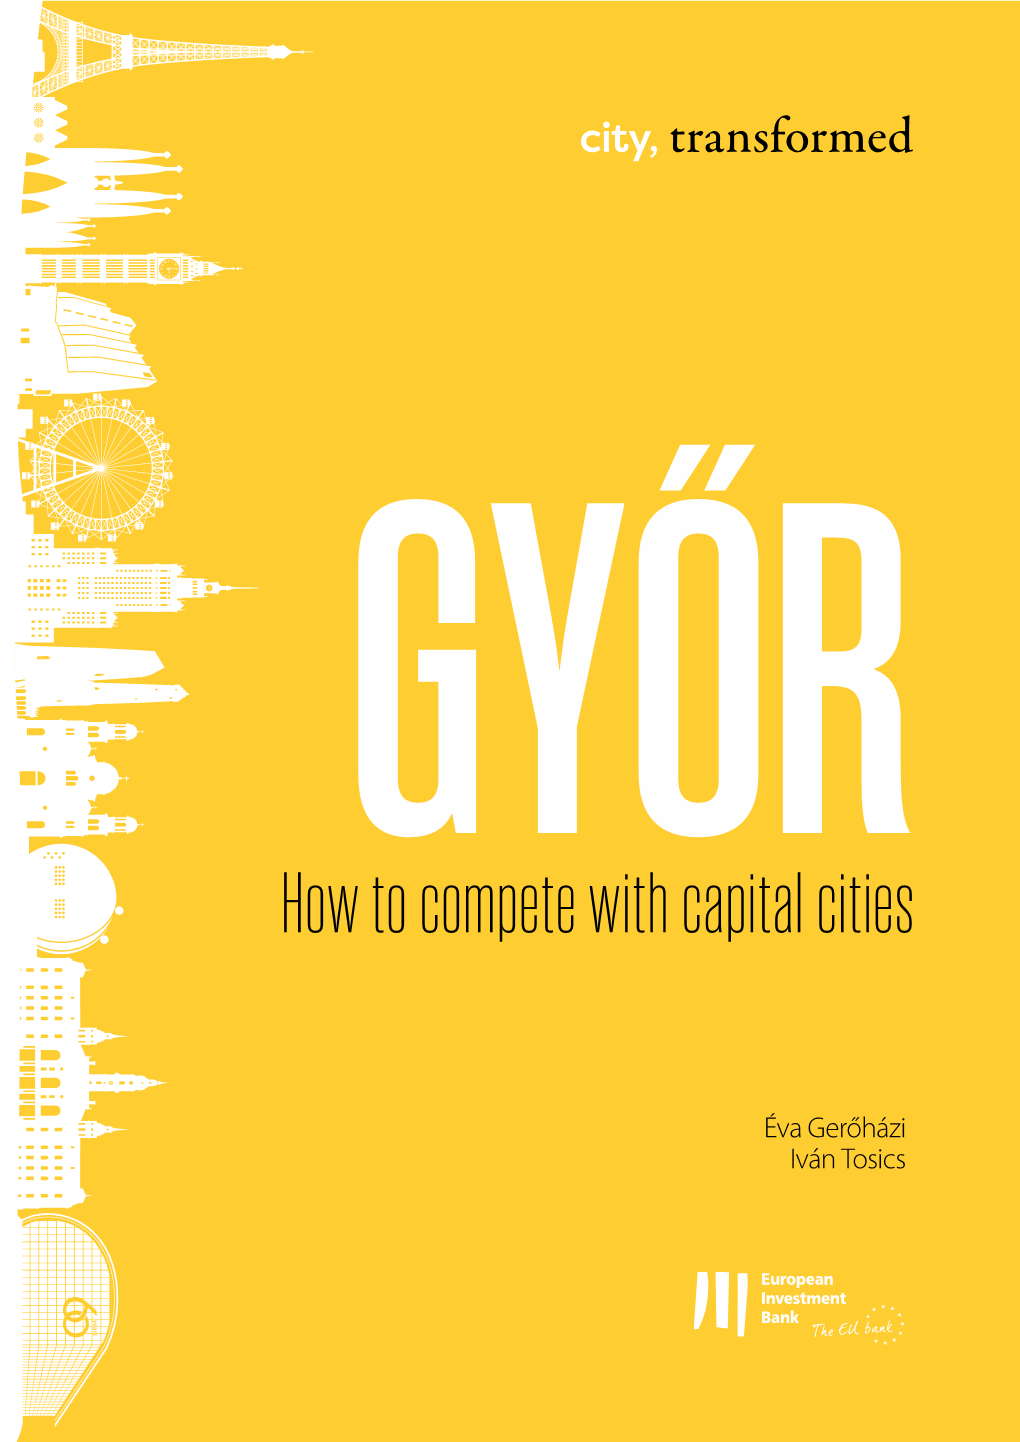 Győr: How to Compete with Capital Cities © European Investment Bank, 2019